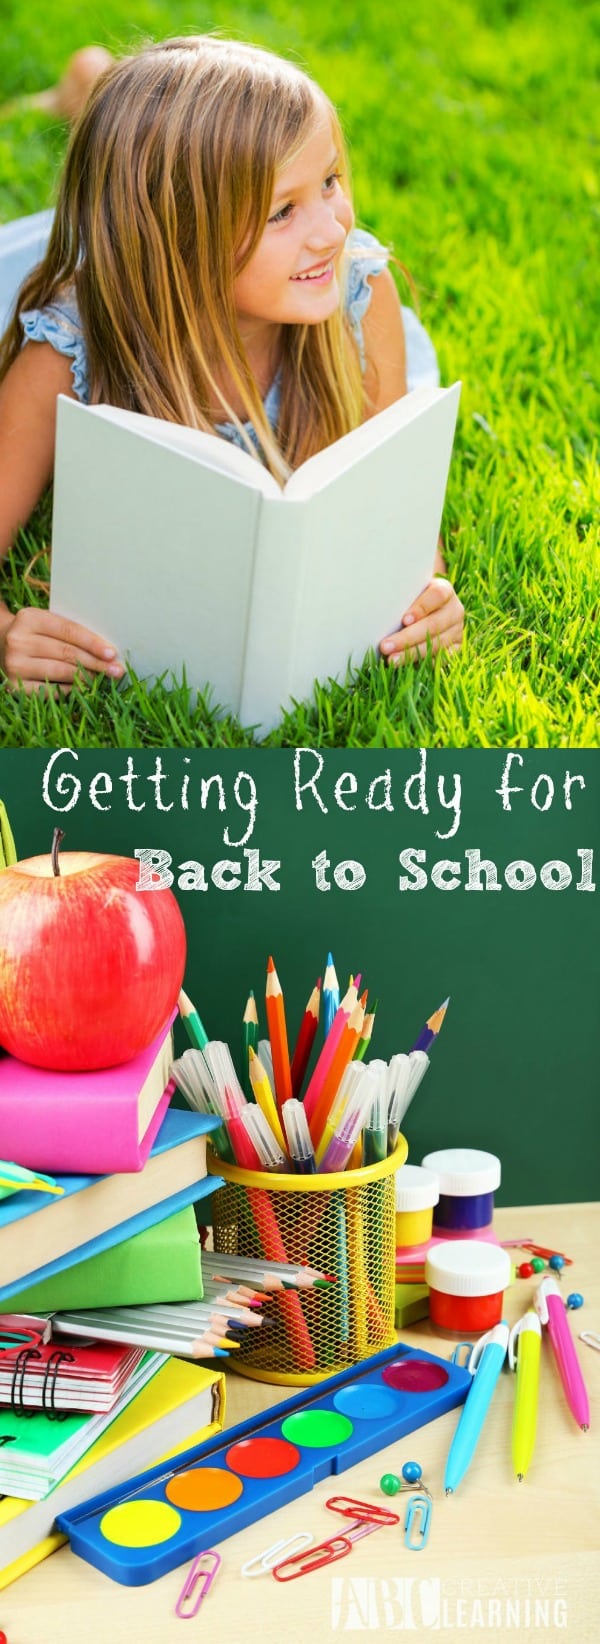 Tips For Getting Kids Ready for Back to School